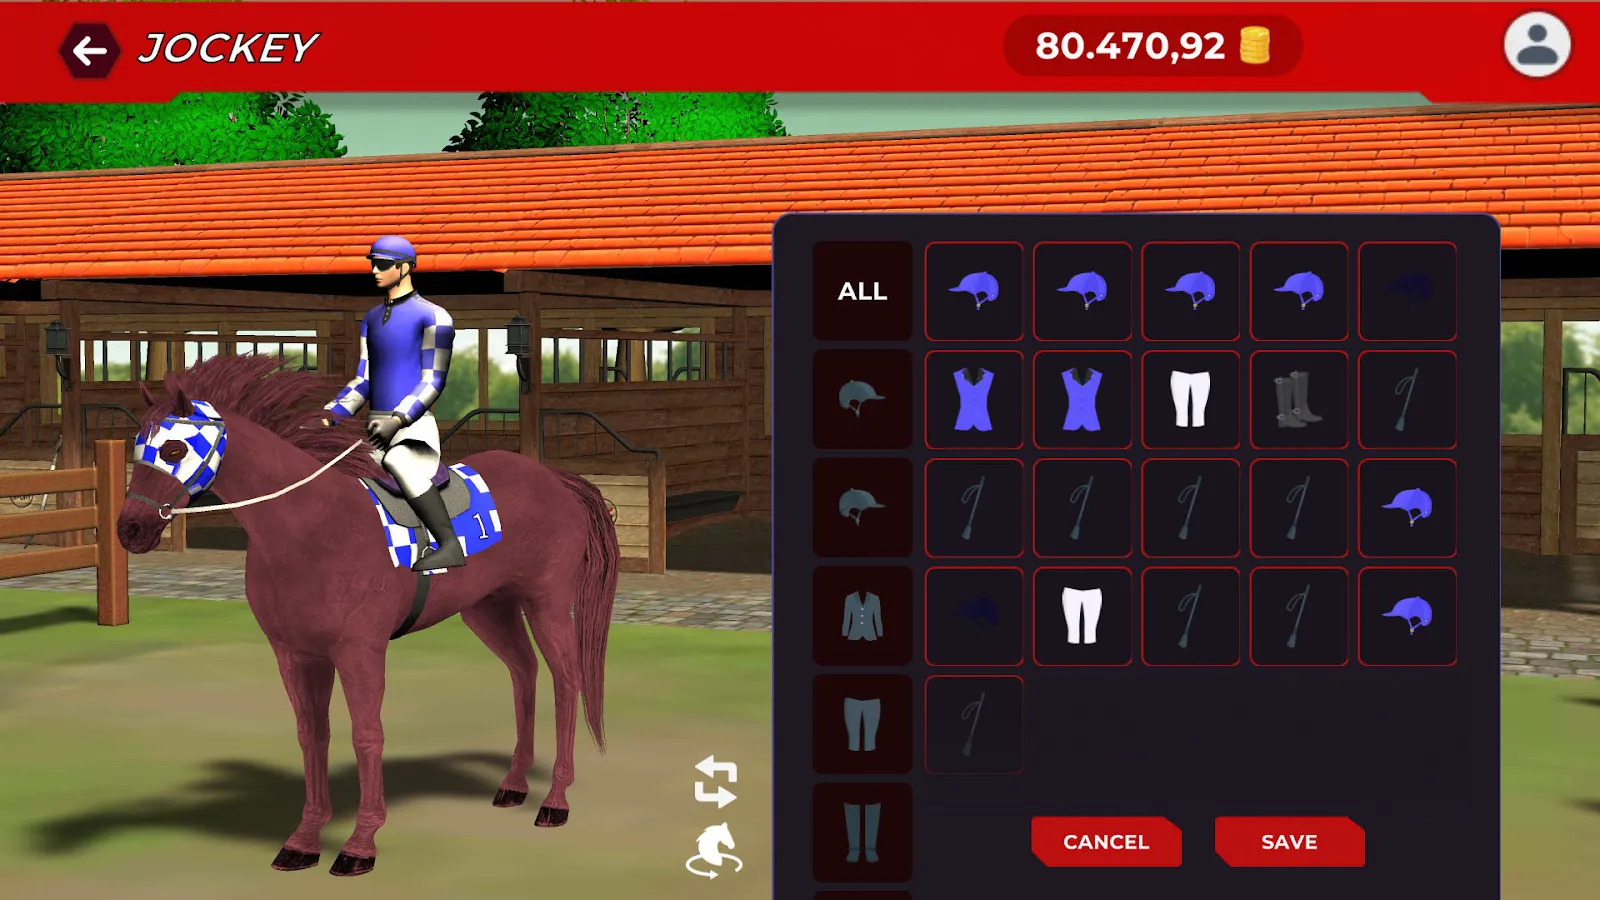 Setting up the in-game character and the NFT horse